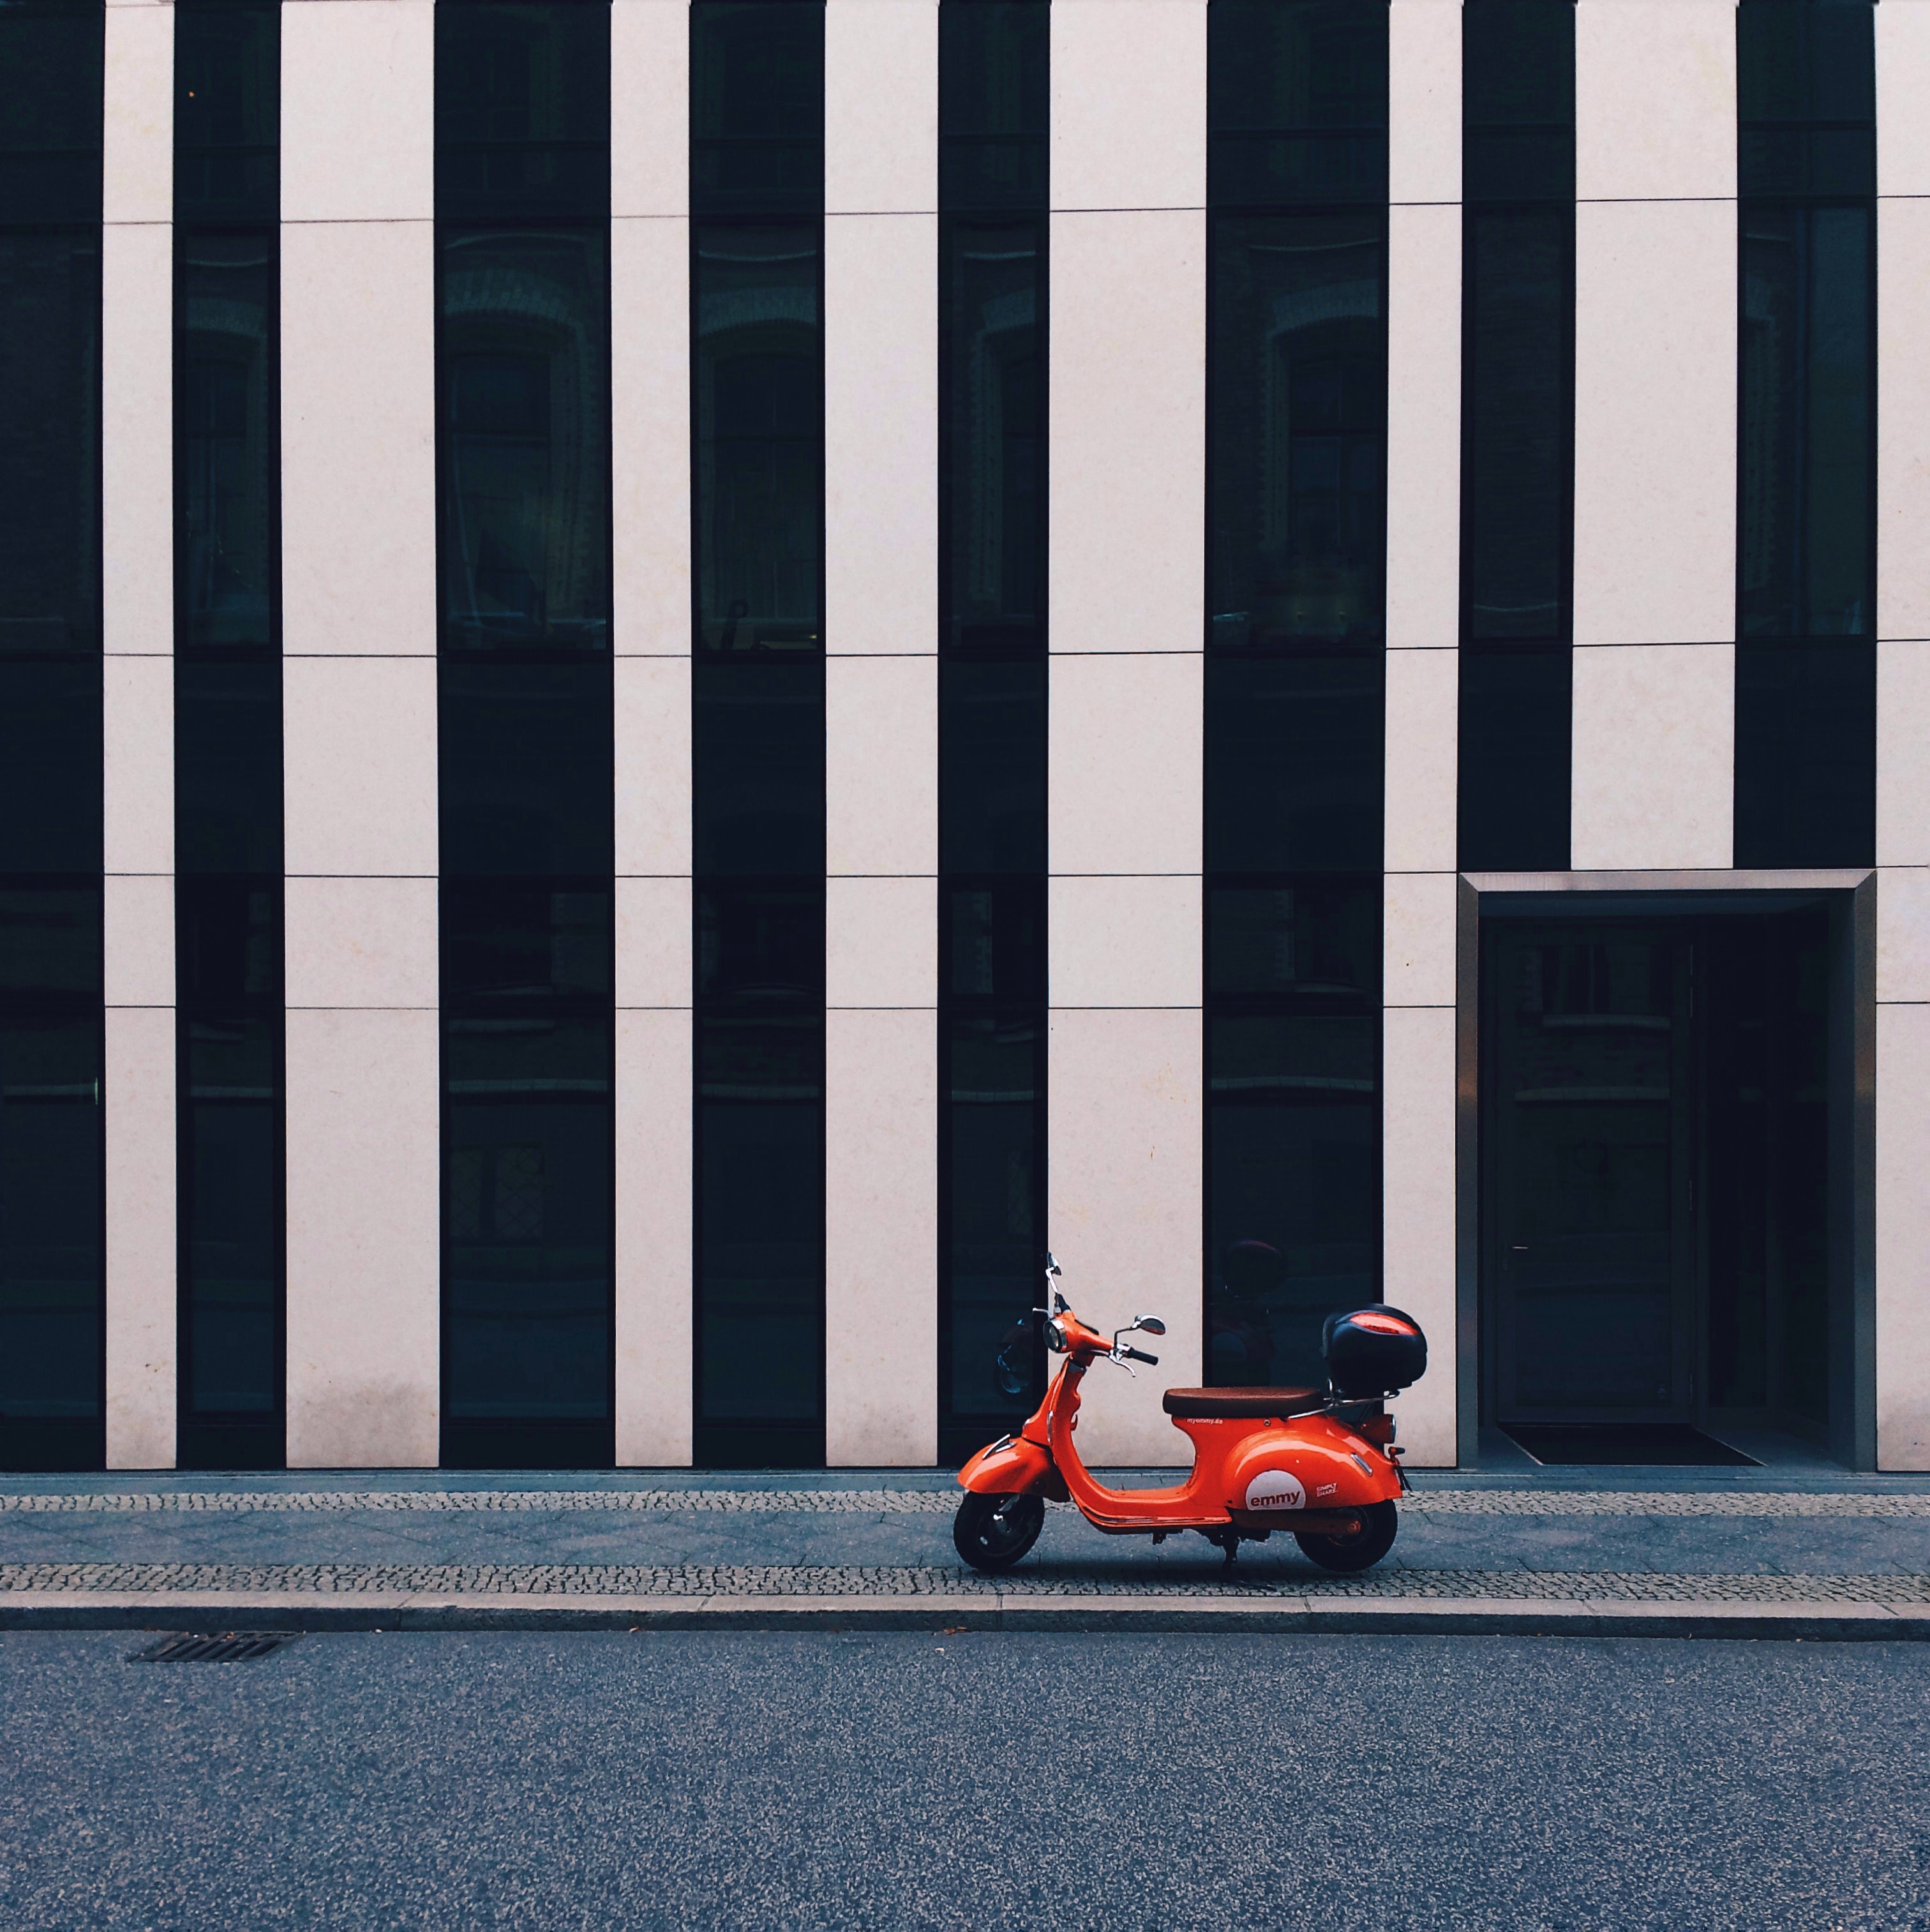 stripes, scooter, streaks, motorcycles, building, motorcycle, facade Full HD